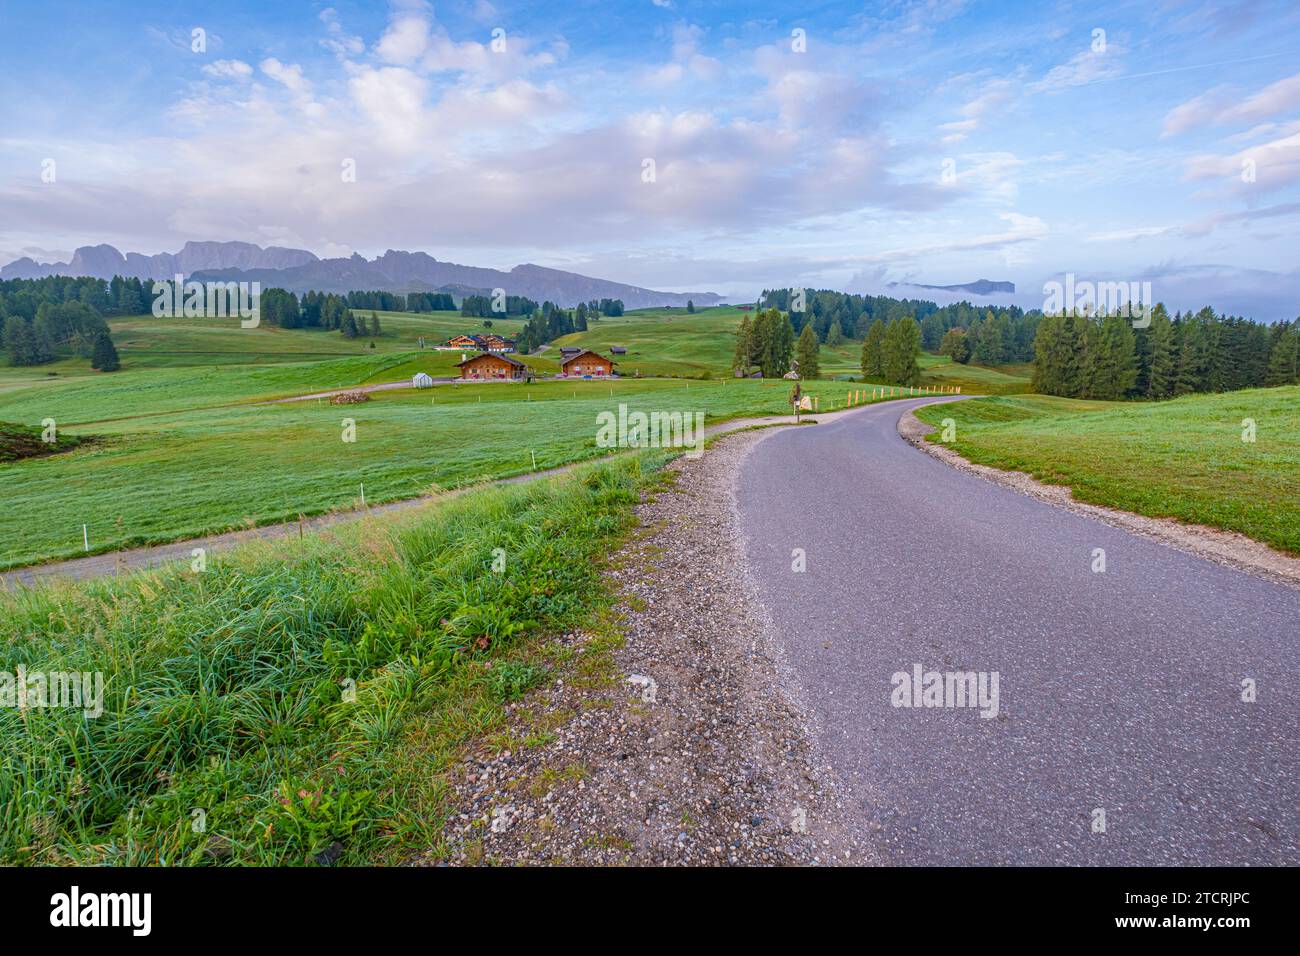 Morning scene, Wood houses dot a green meadow, framed by Alpe di Siusi in the background, under a partly cloudy sky and the calming hues of blue Stock Photo